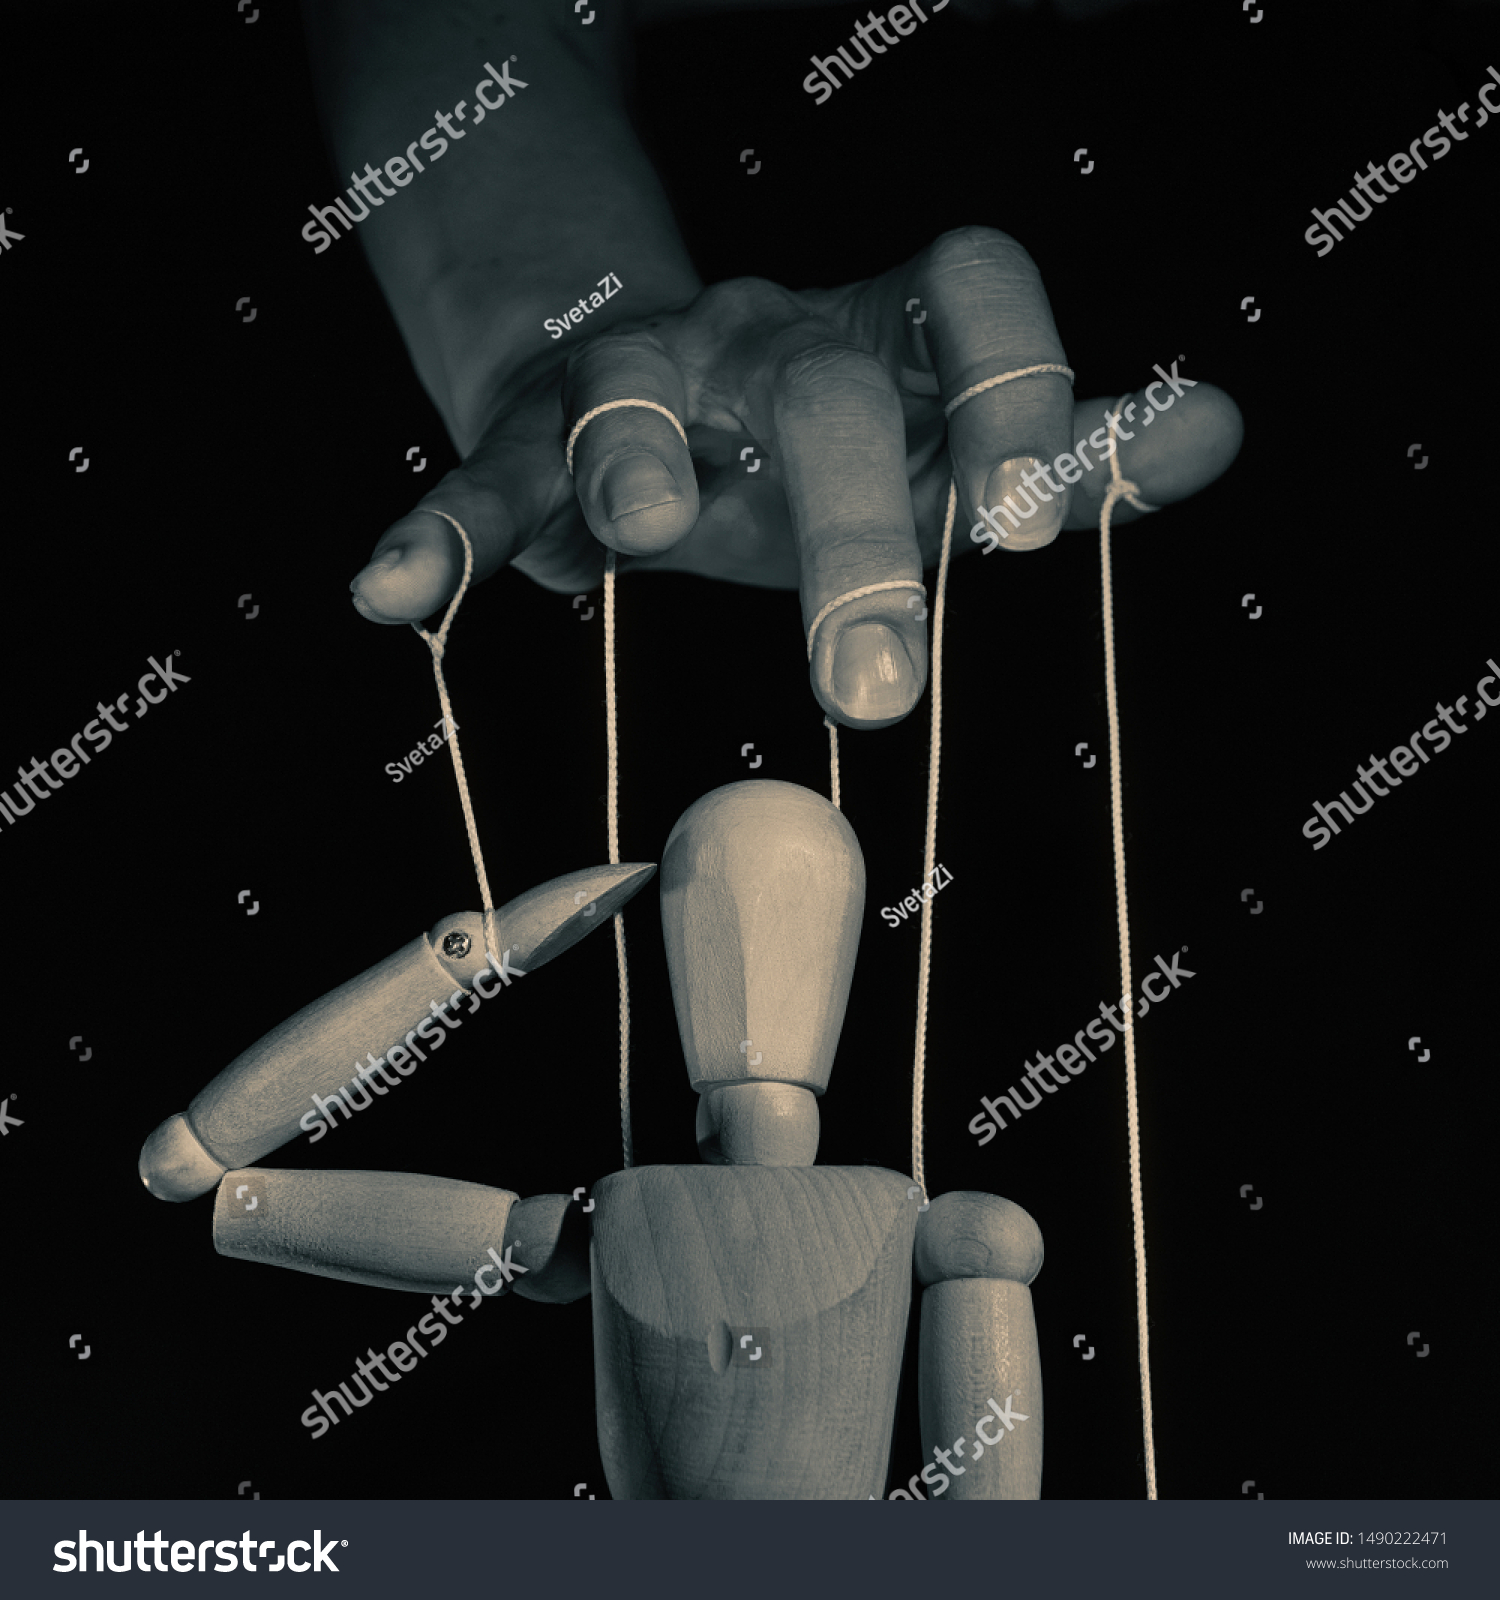 Concept of control. Marionette in human hand l, black and white. Image. #1490222471